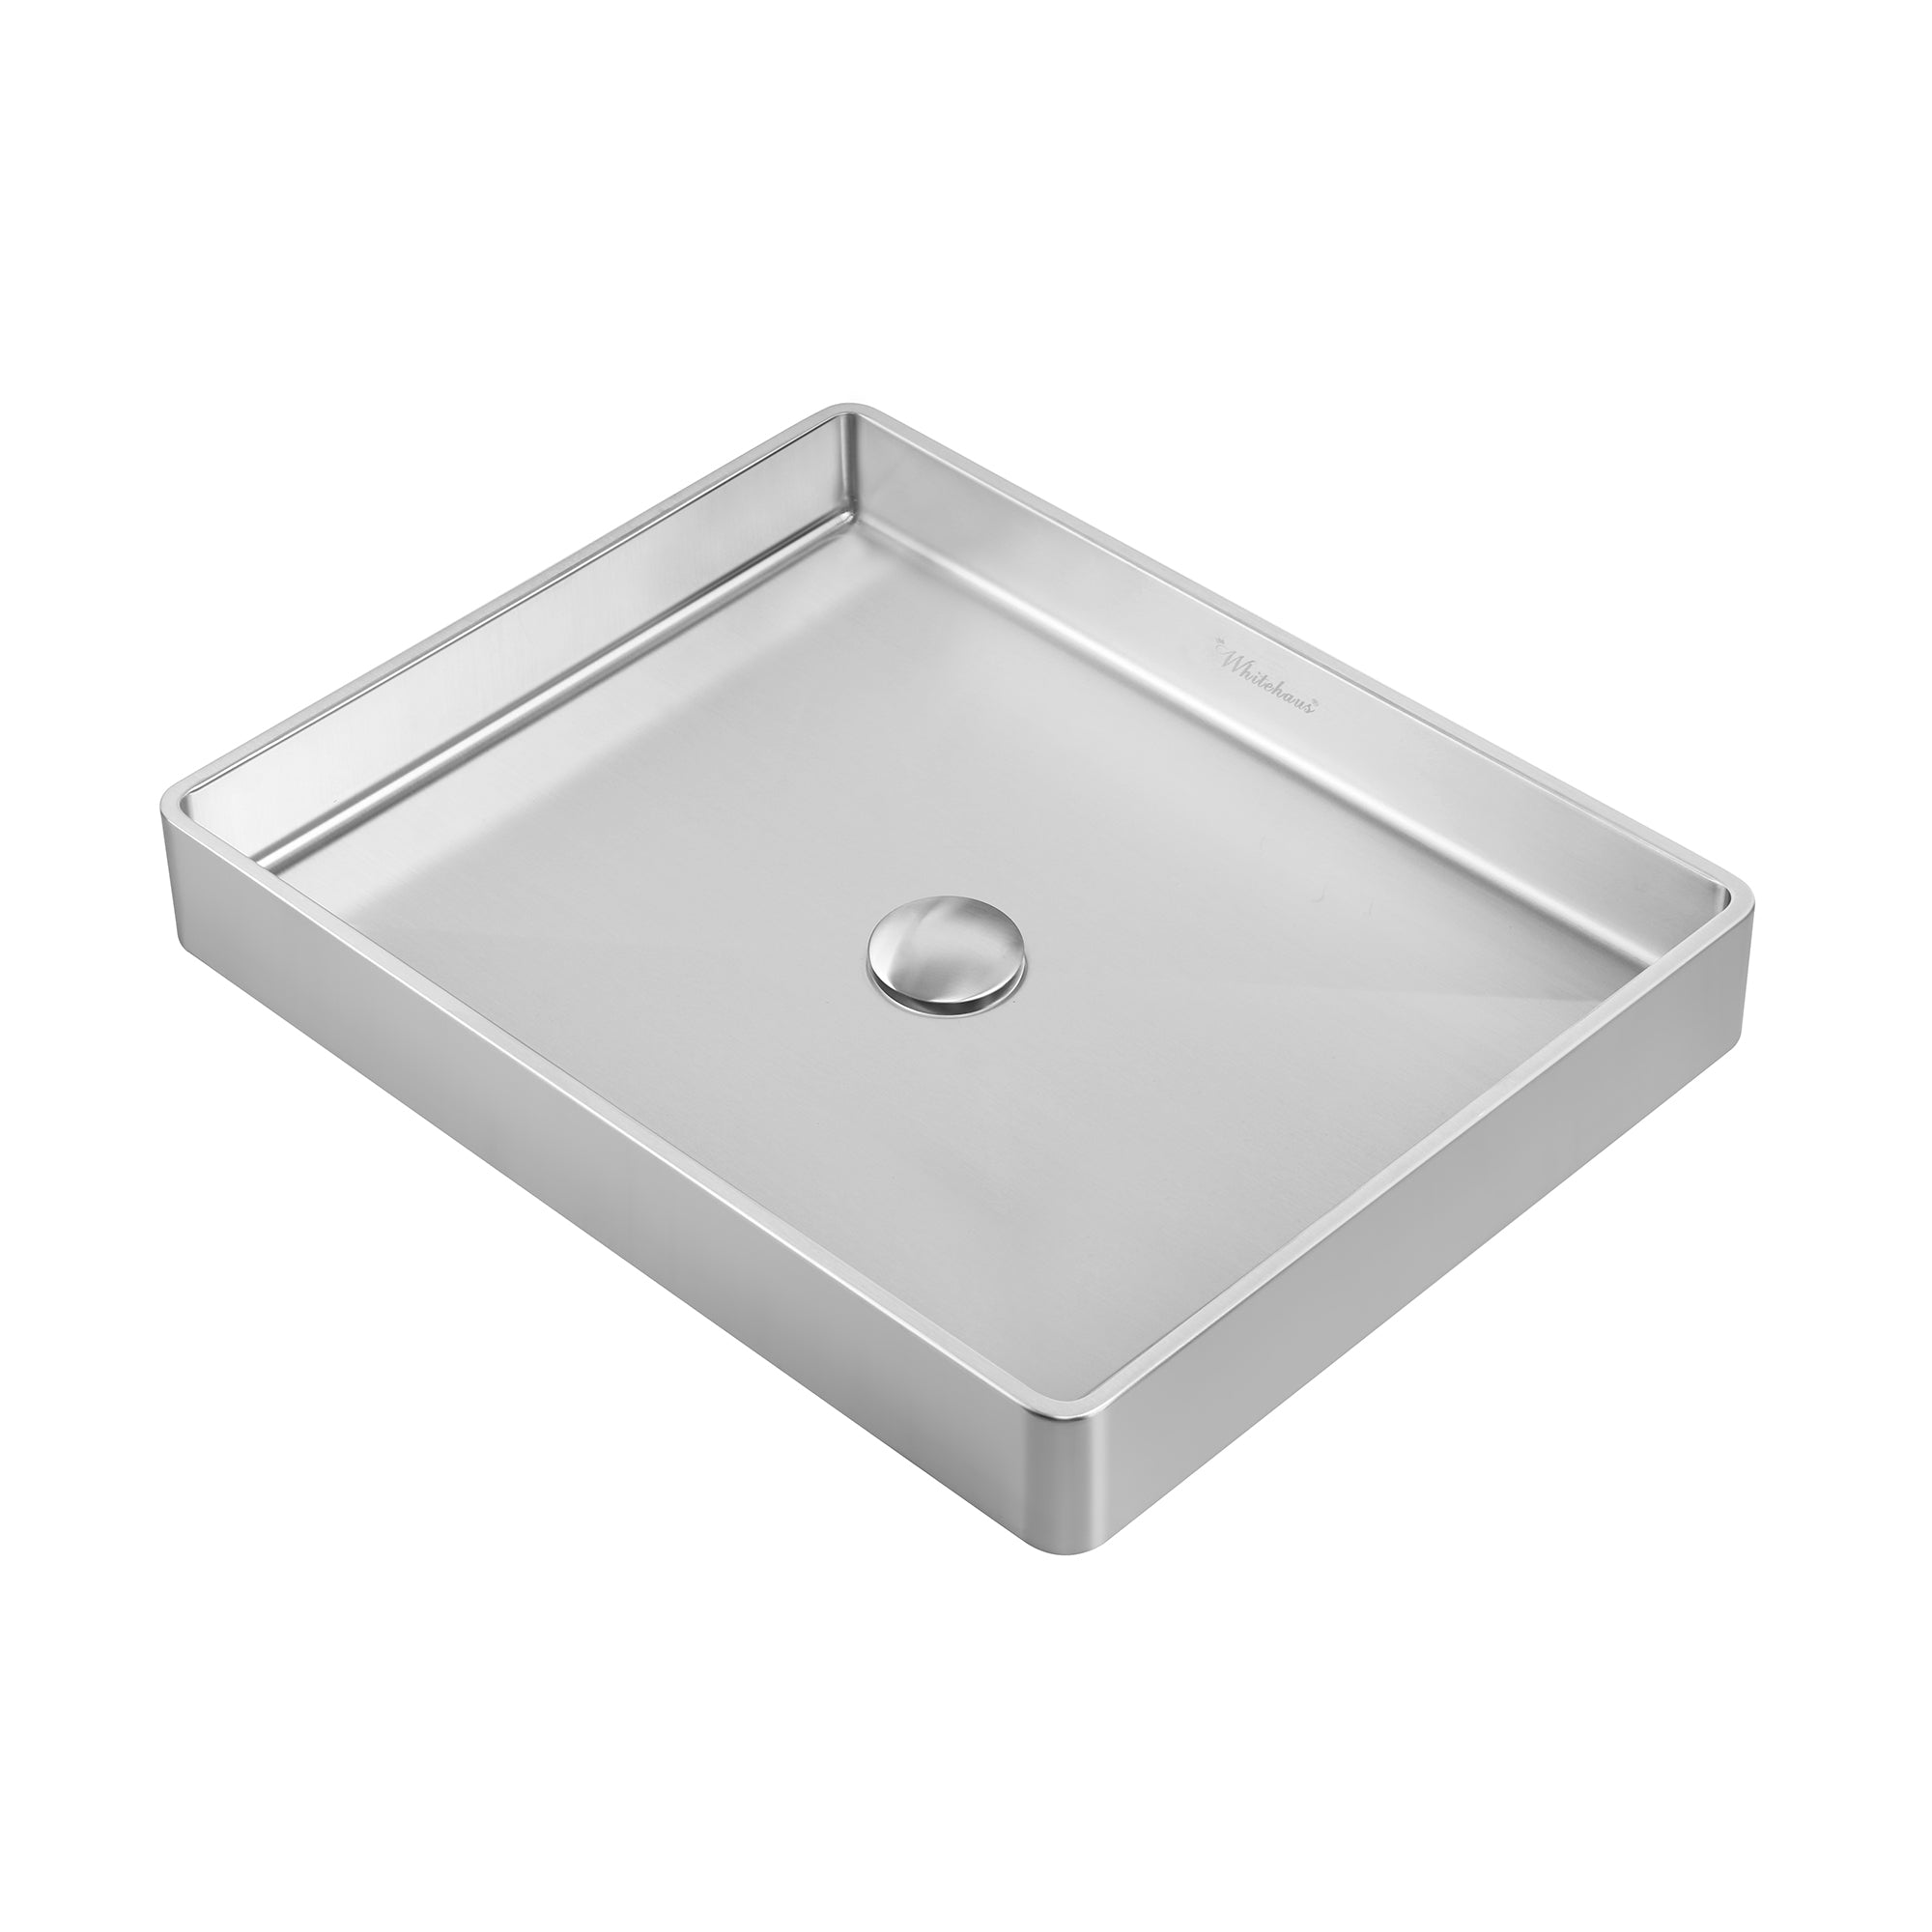 30 Noah Plus single bowl 16 gauge sink set with a seamless customized -  Whitehaus Collection